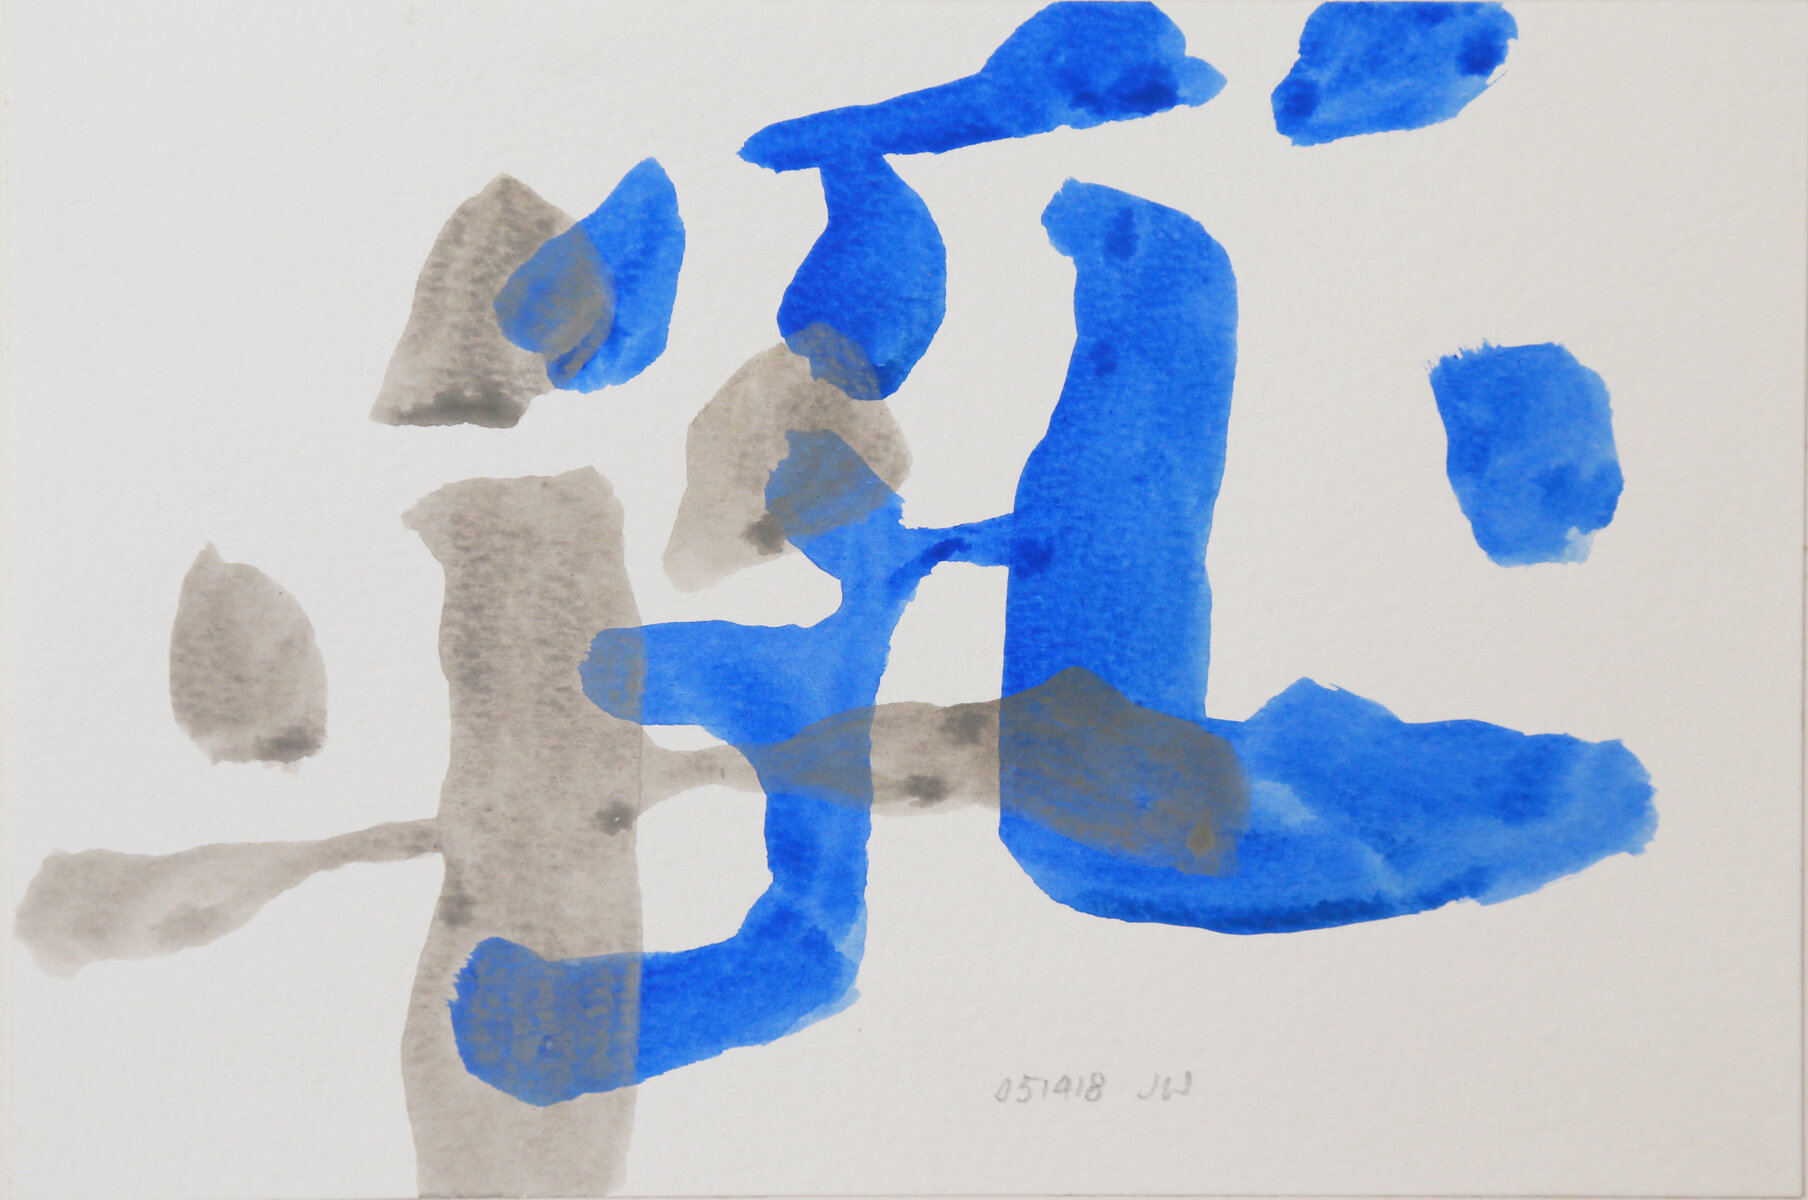  Wei Jia,  S 051418 , 2018. Ink and gouache on paper, 6 x 9 inches ©Wei Jia, courtesy Fou Gallery   